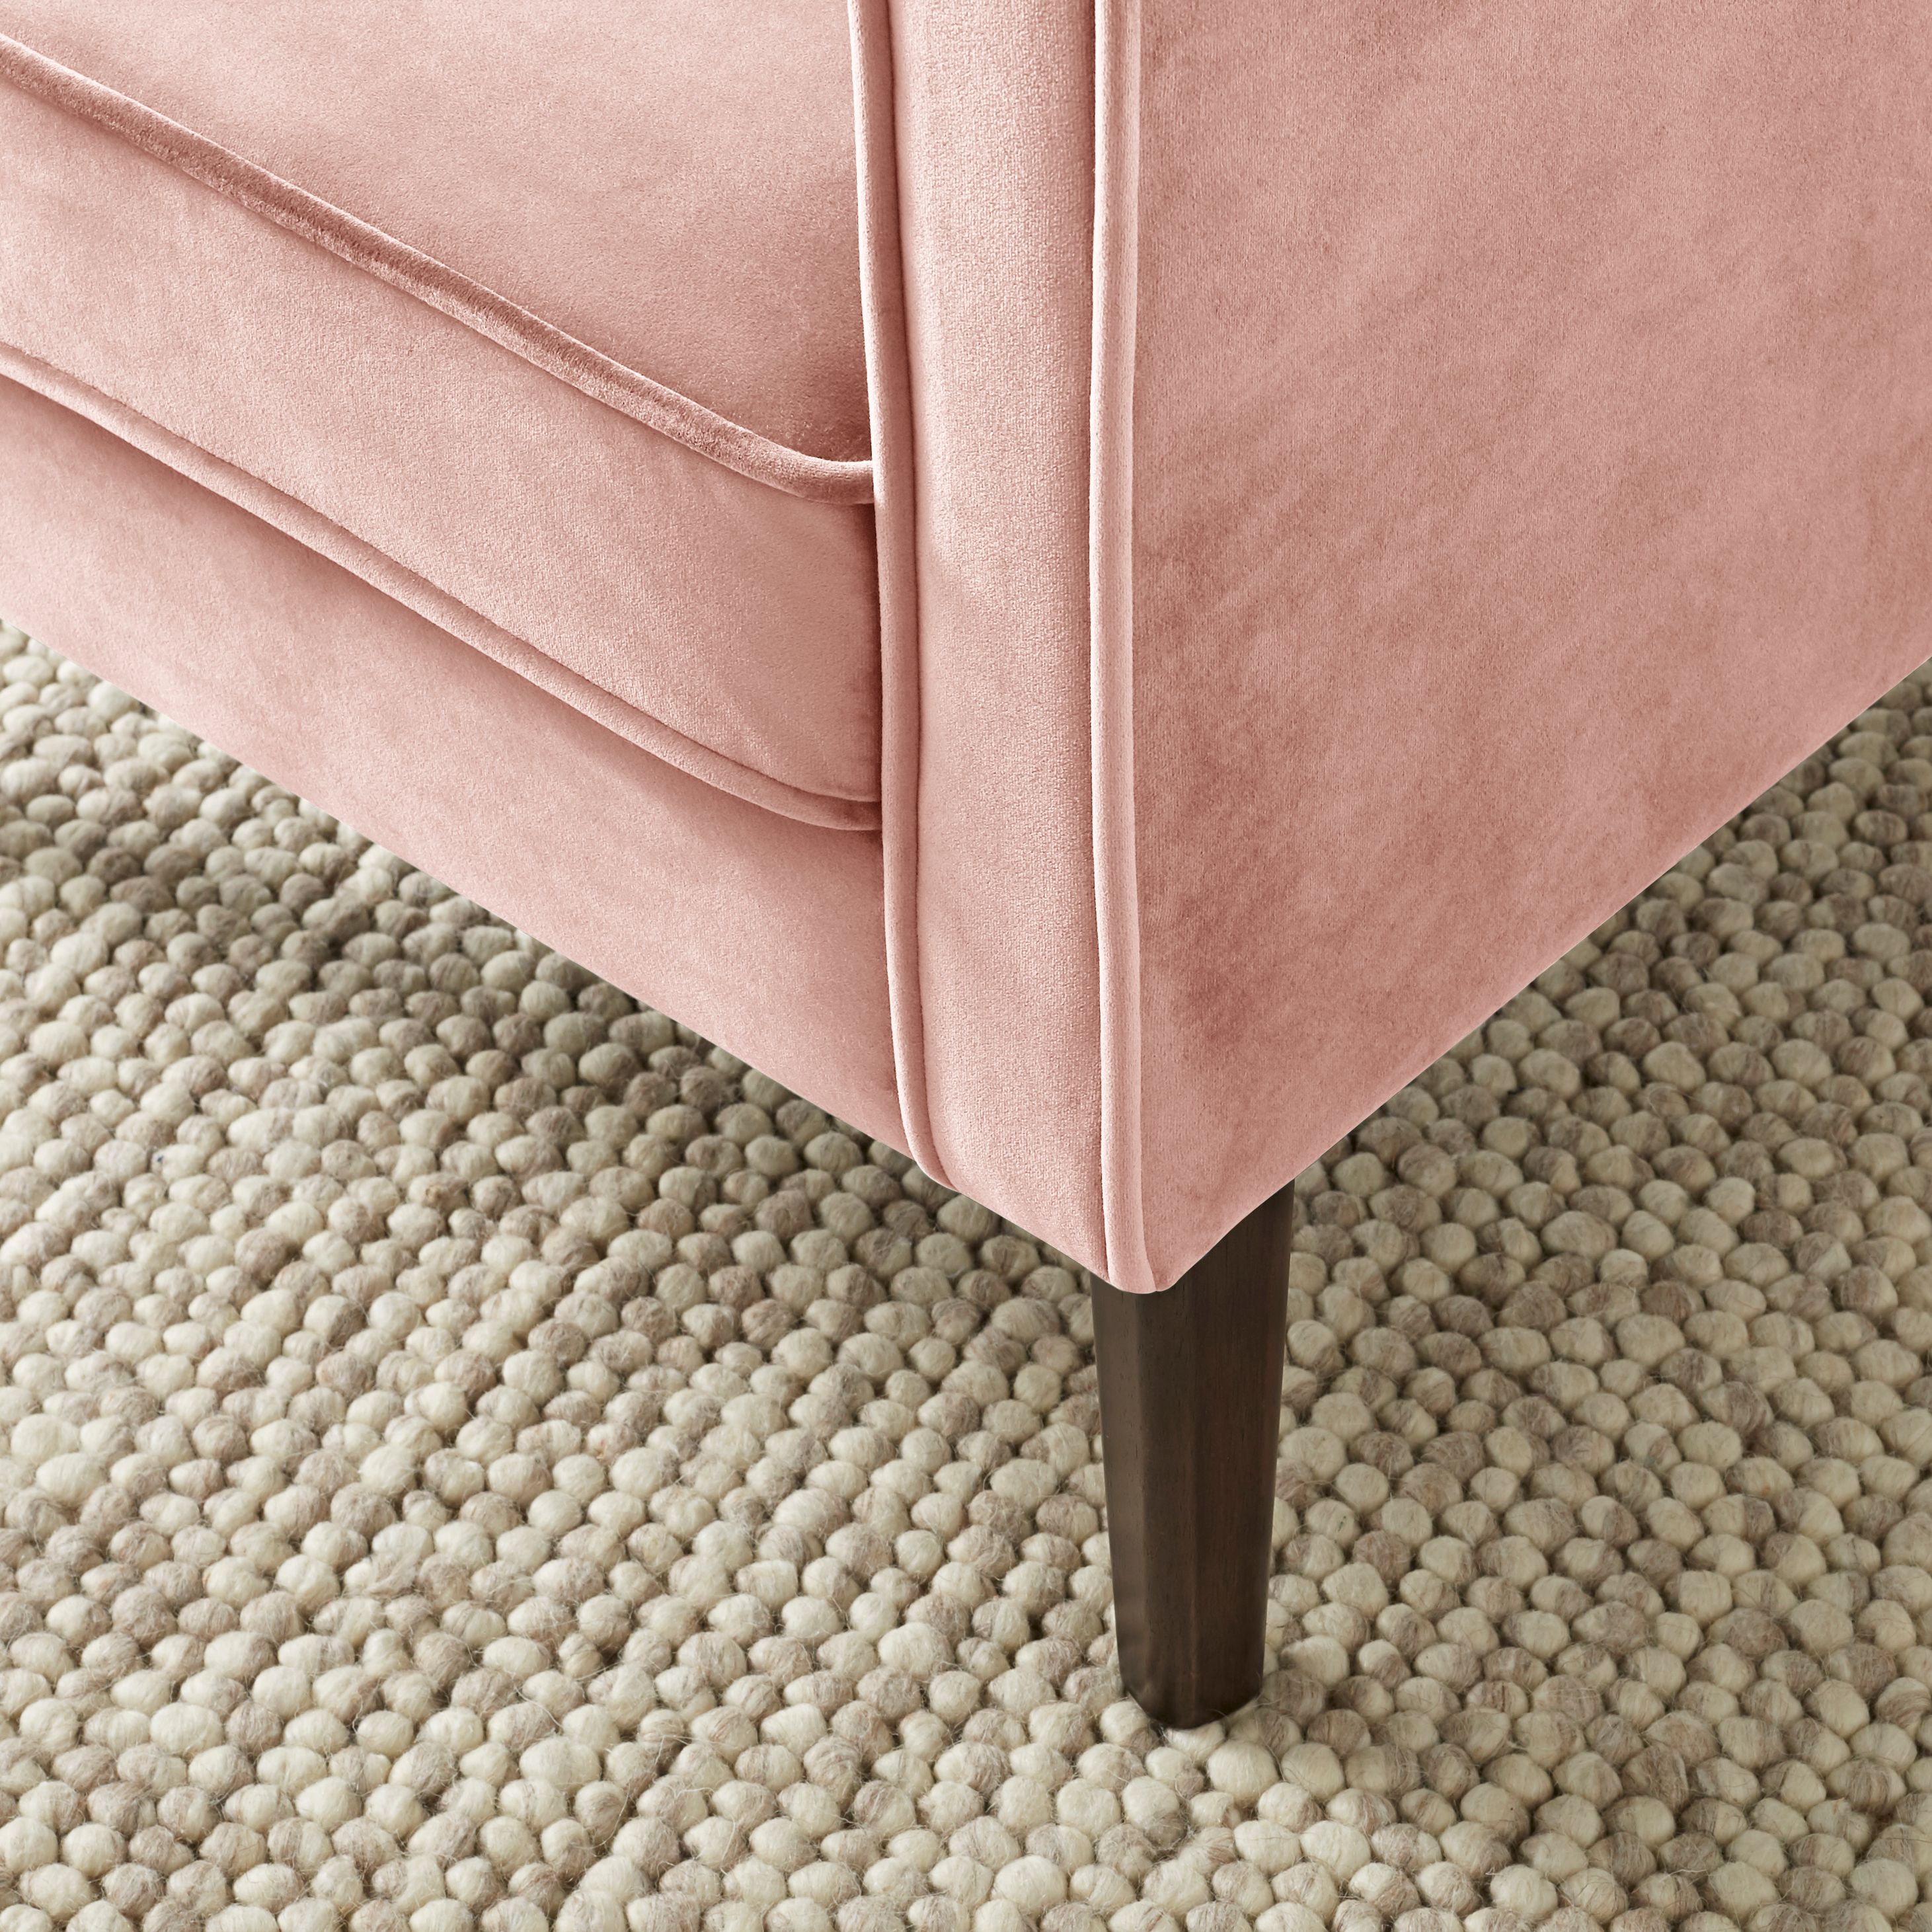 Better Homes & Gardens Marlowe Lounge Chair, Pink - image 2 of 2